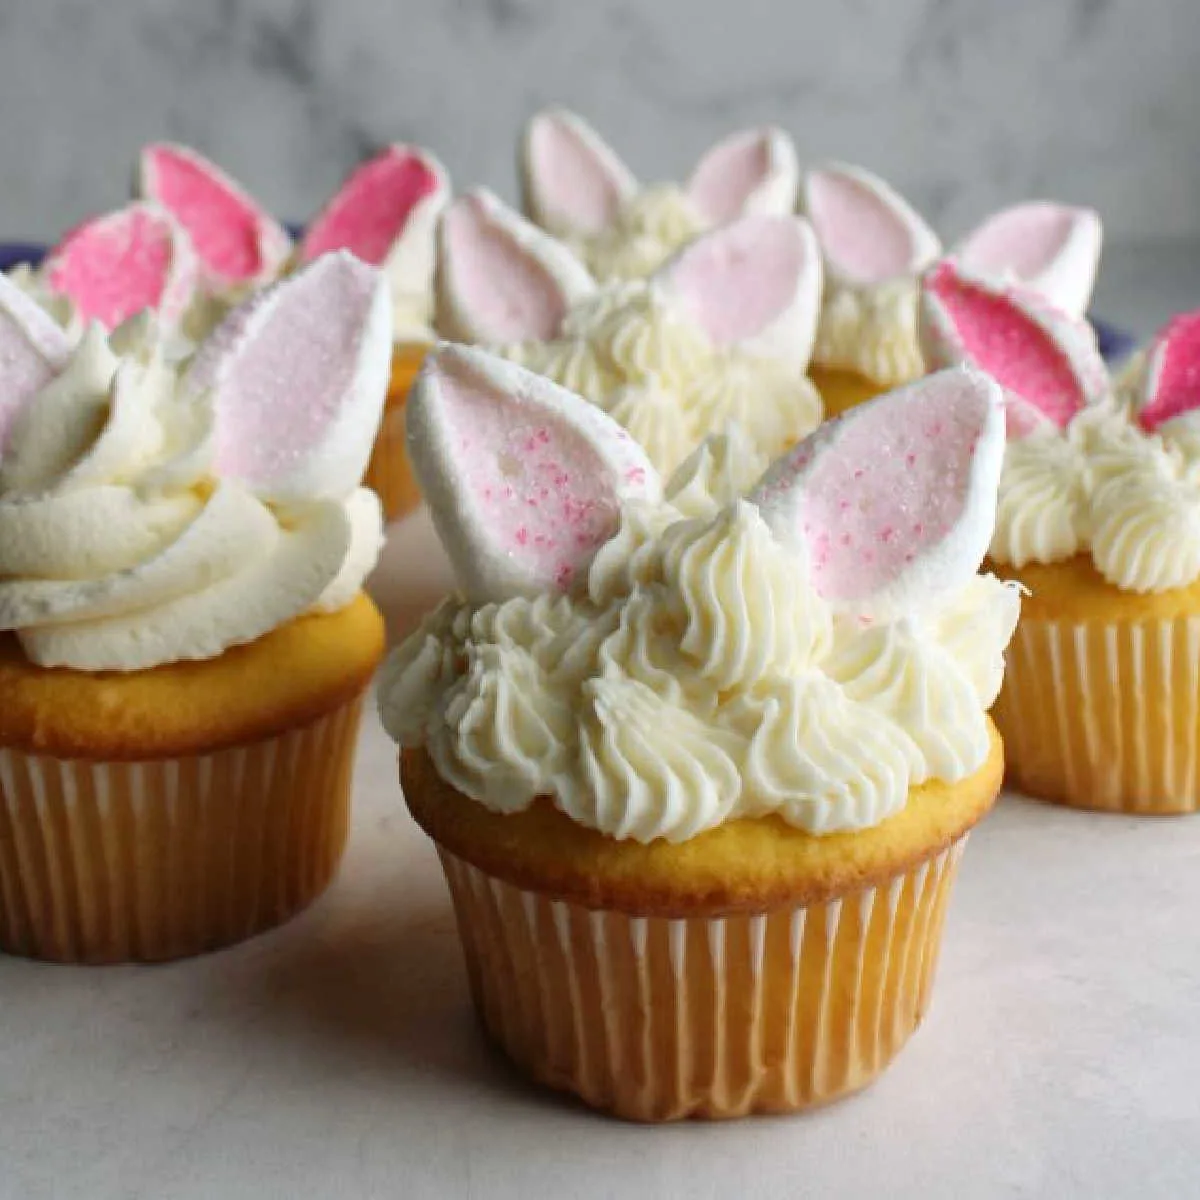 close up of group of bunny cupcakes with piped buttercream and marshmallow ears.